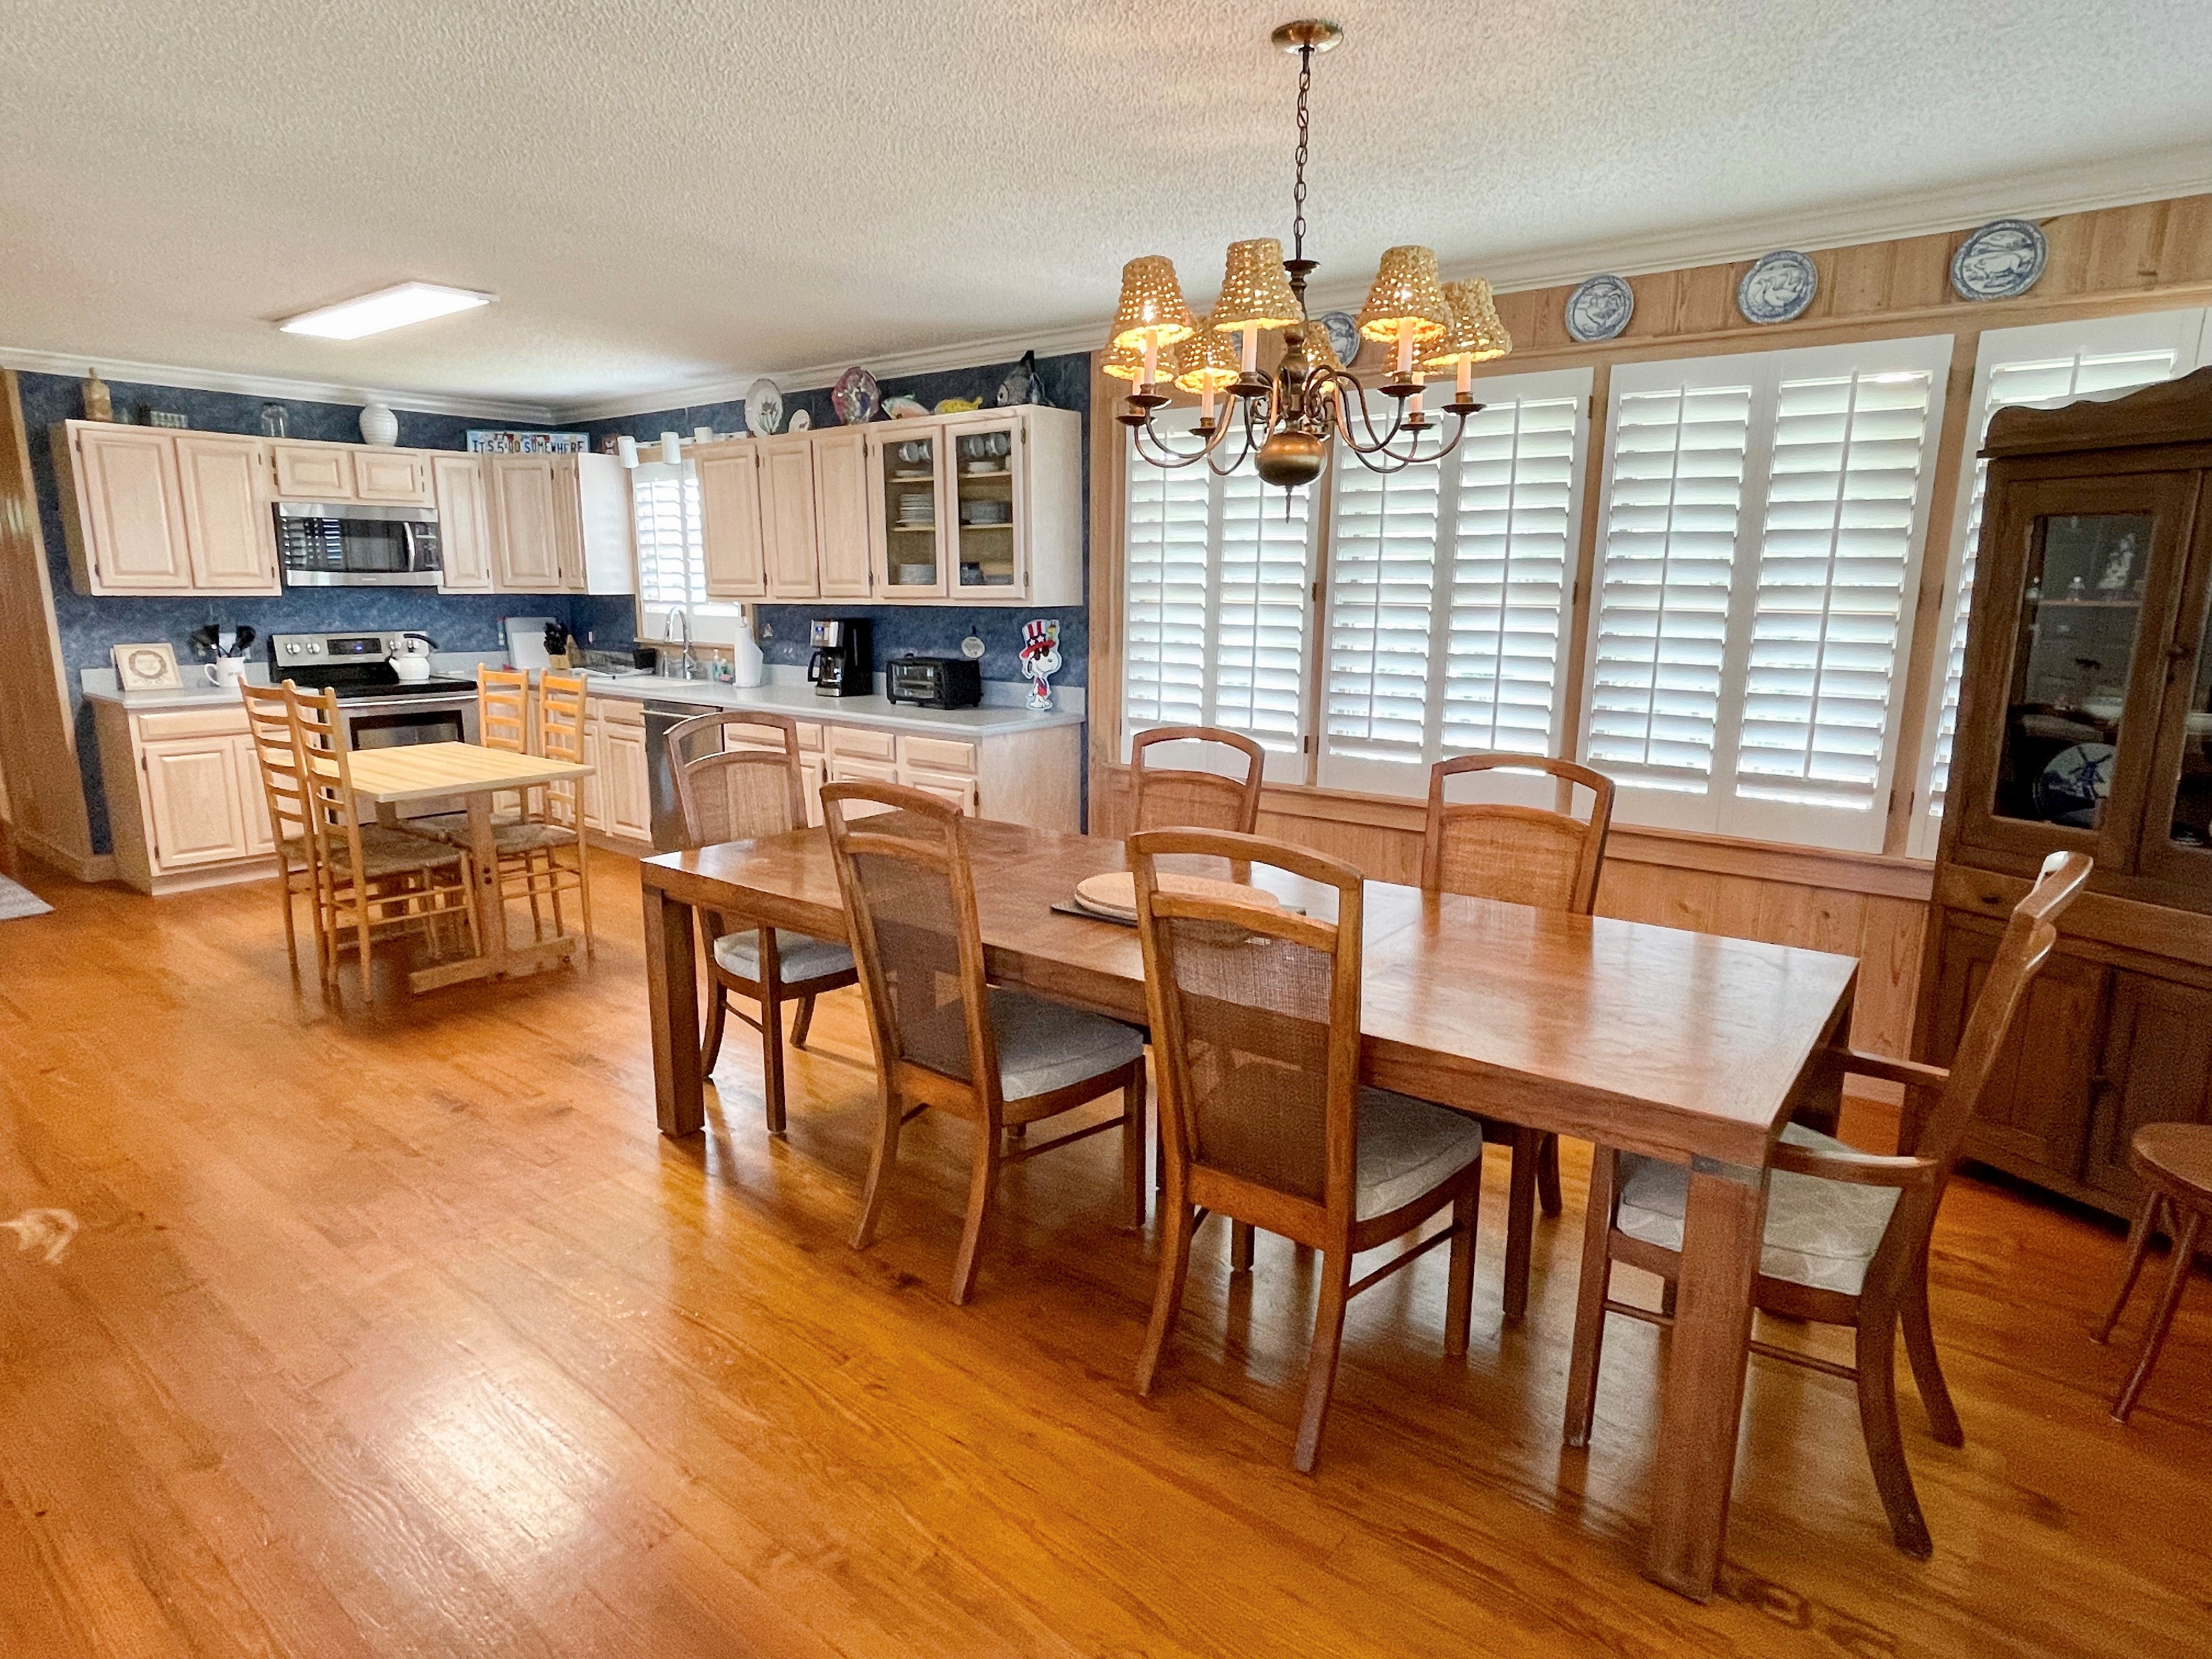 Overall Dining and Kitchen Area